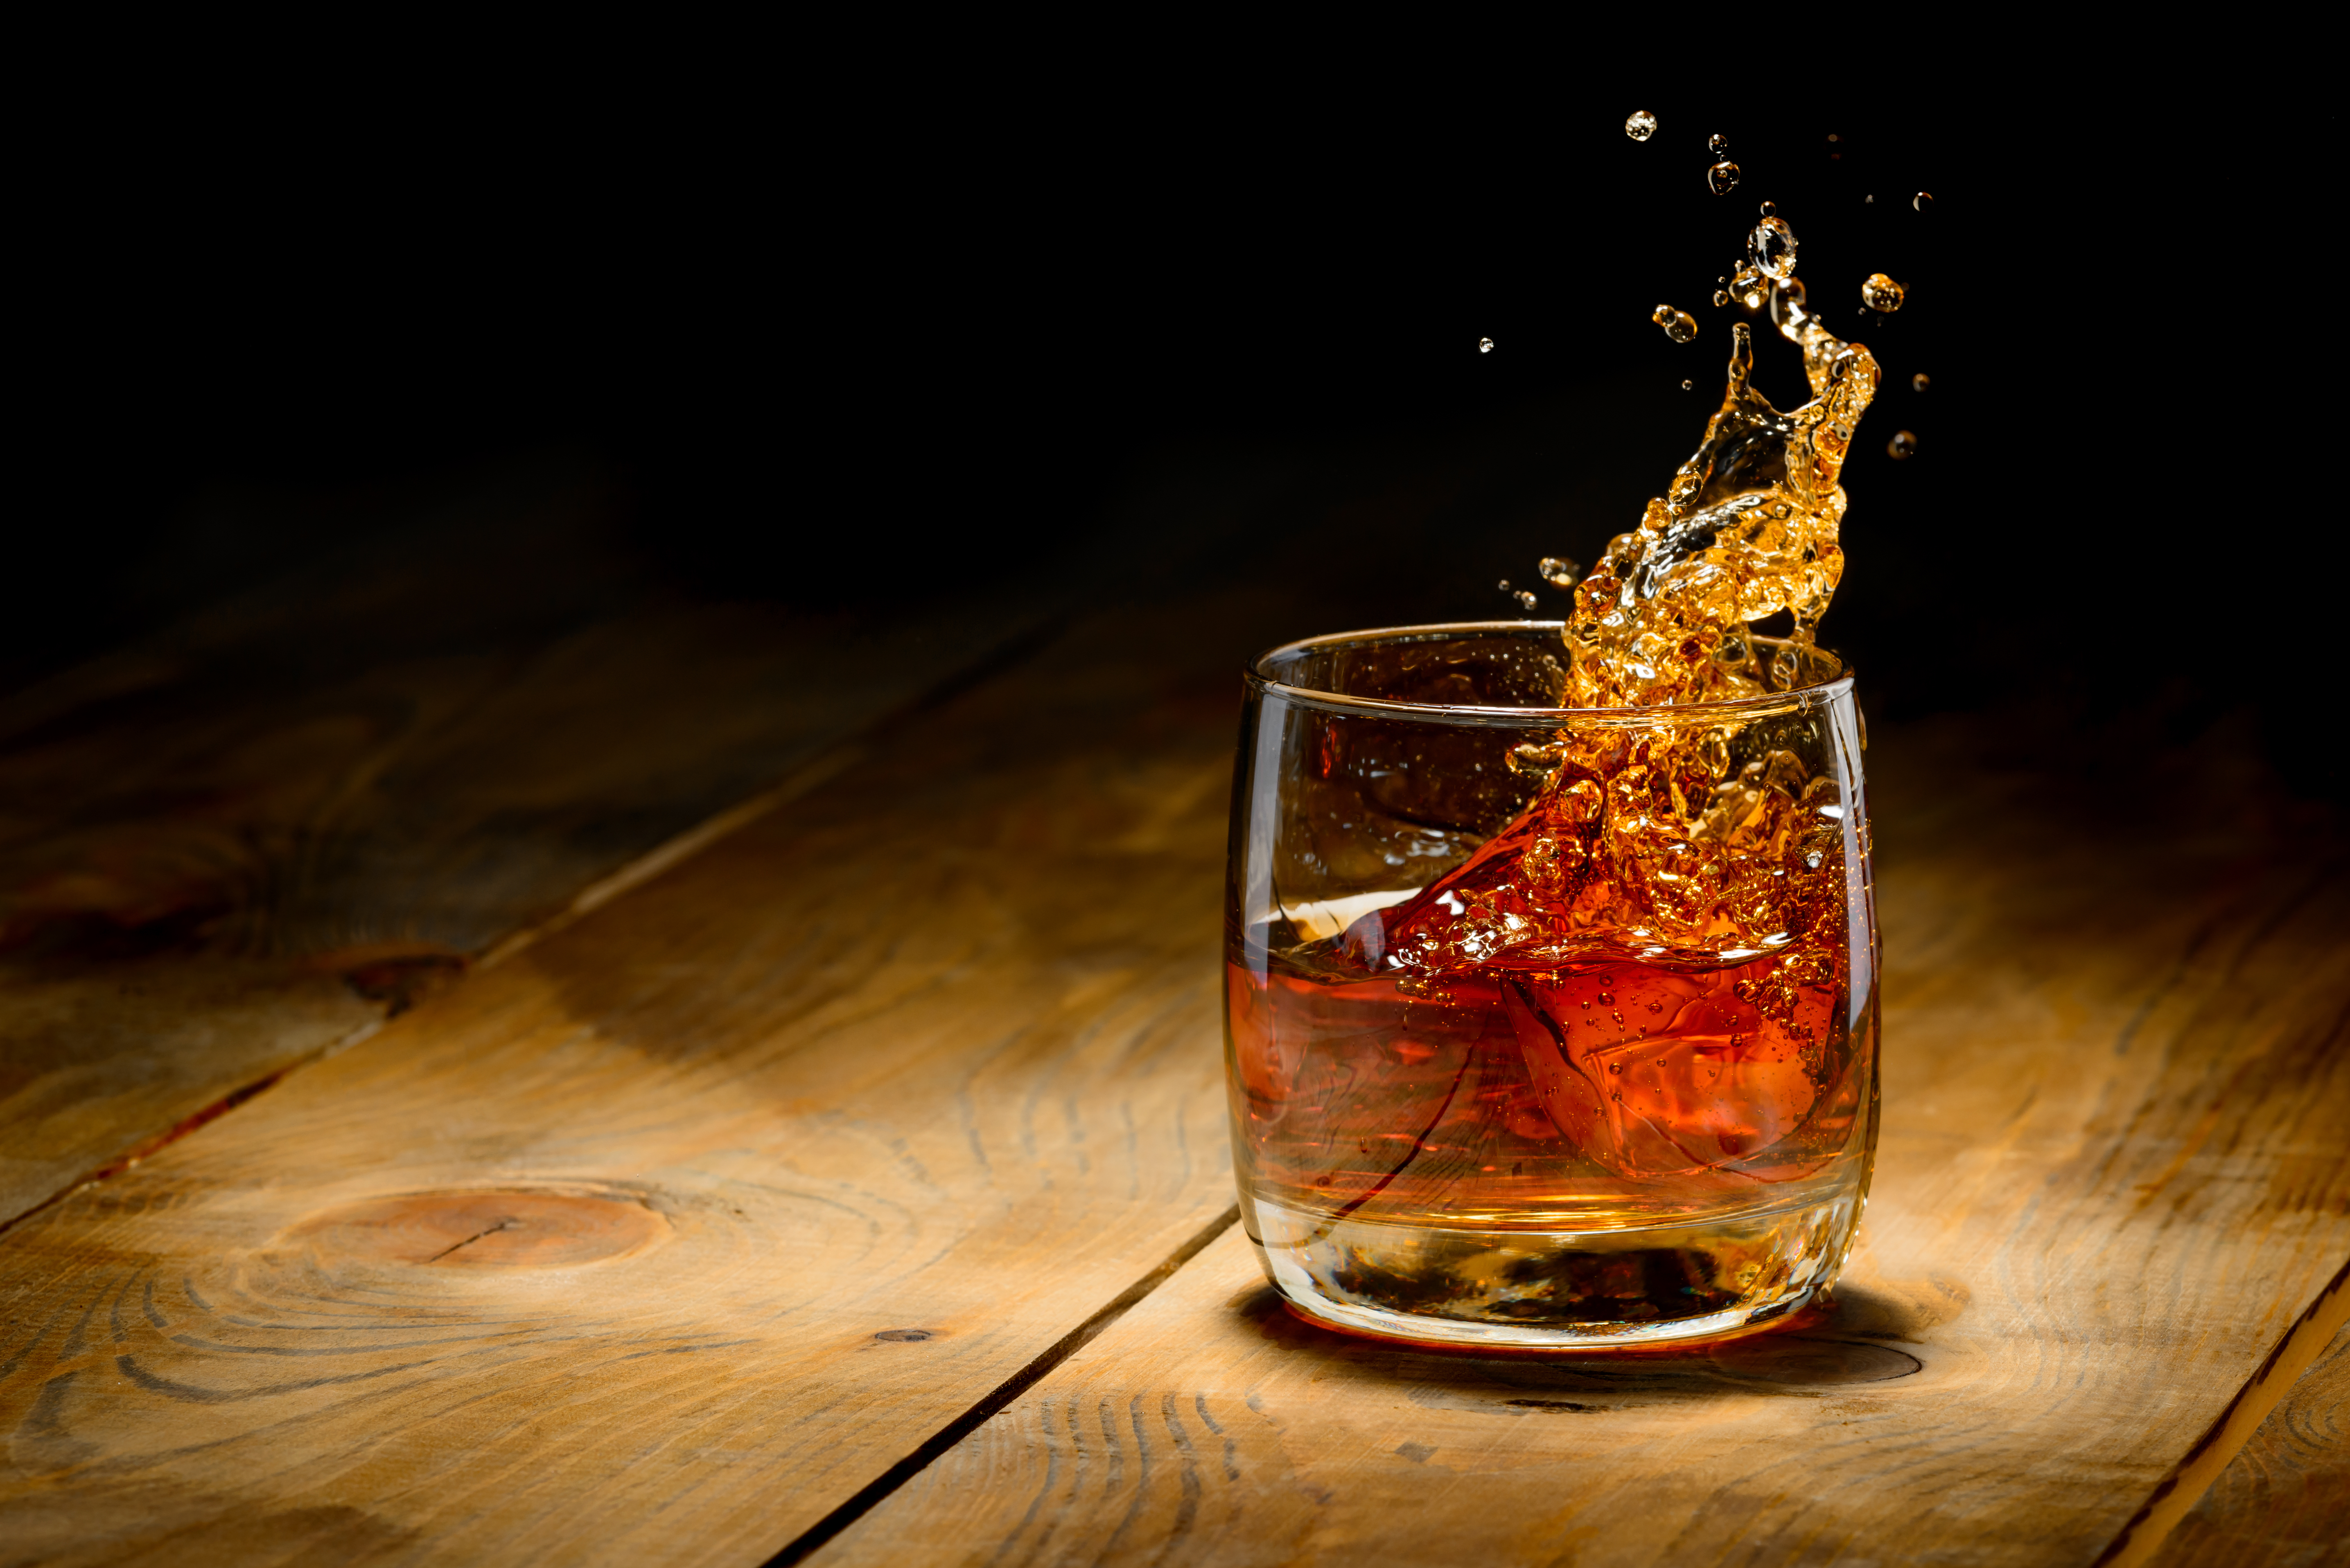 whiskey wallpapers